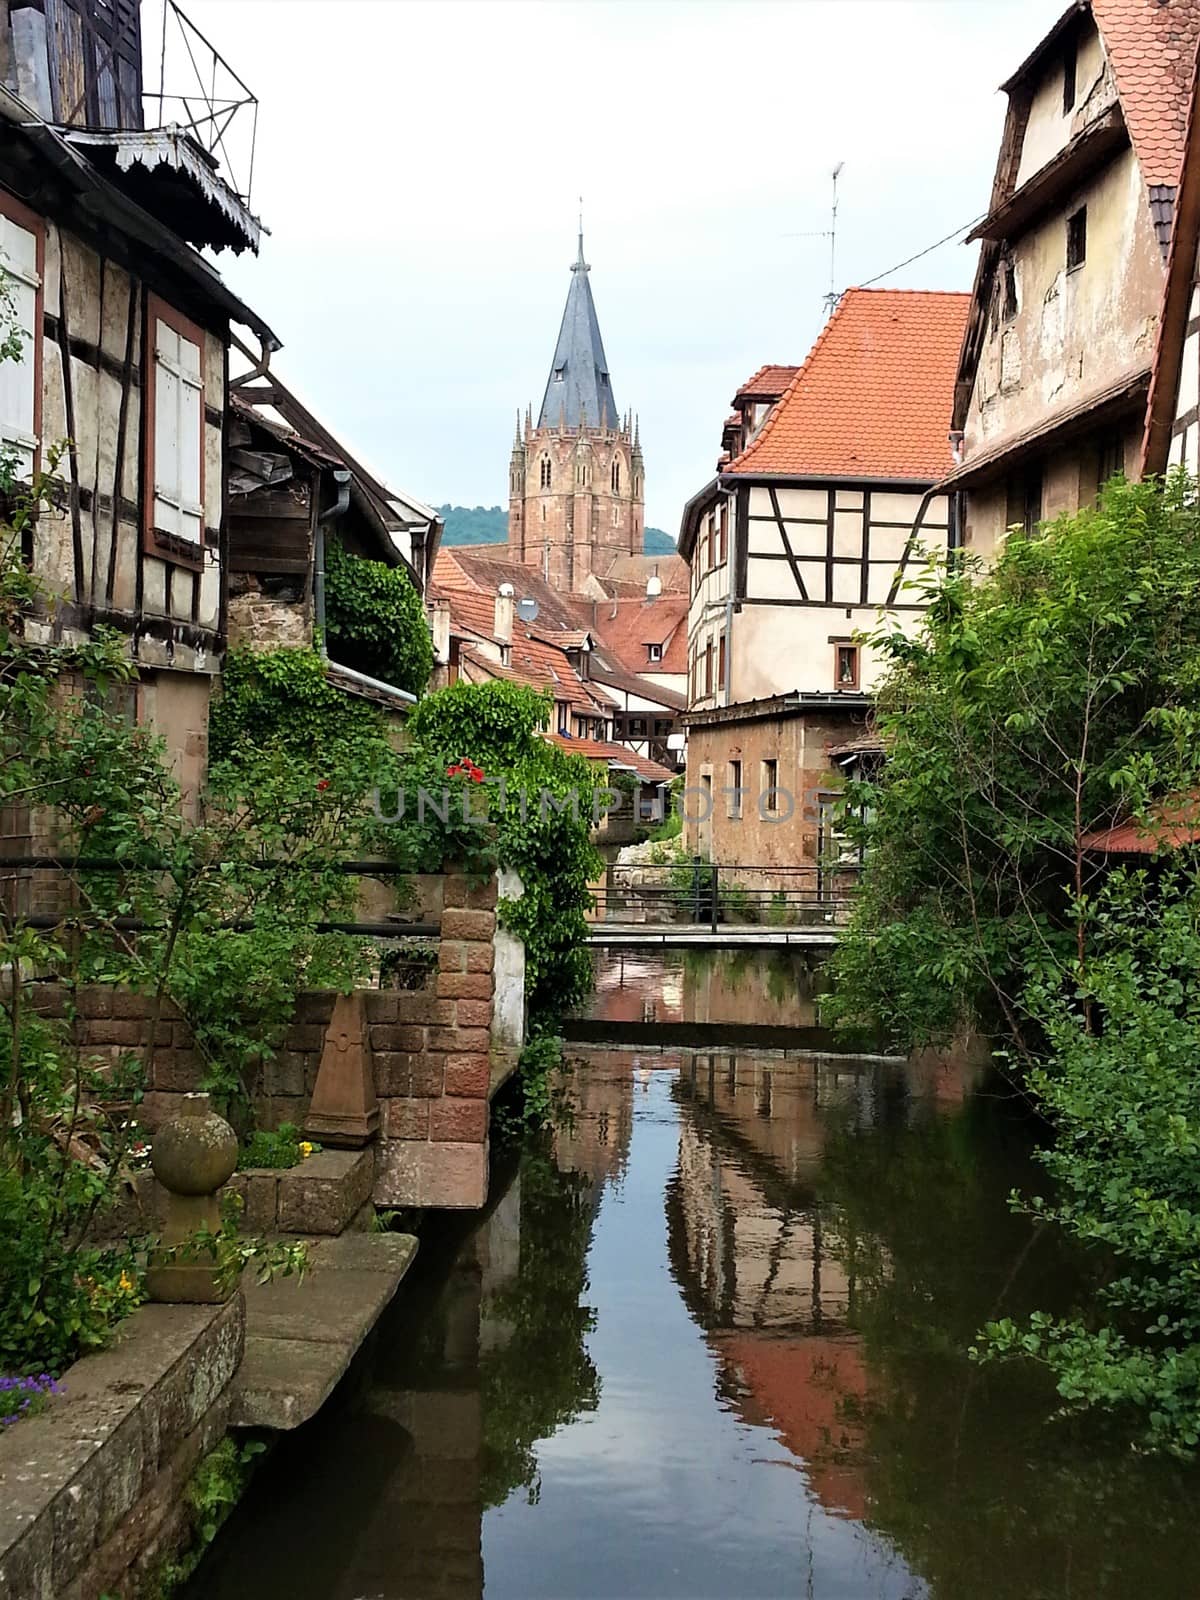 Beautiful view over tranquil canal in the city of Wissembourg, France